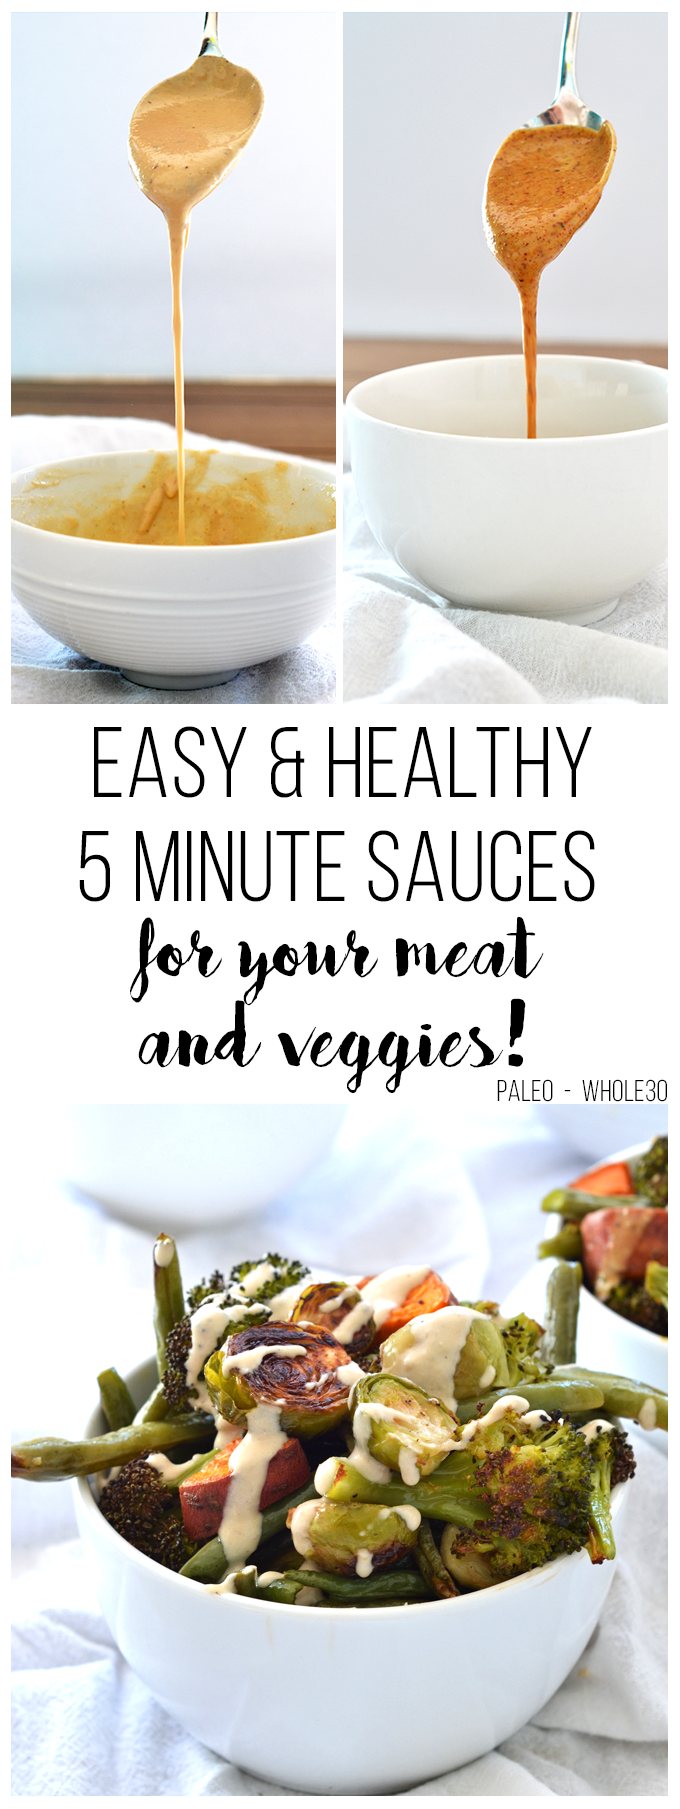 These Sauces are easy, healthy and come together in just 5 minutes! Both are Paleo & Whole30 - perfect to pour over veggies, meat, or whatever you are having for dinner!